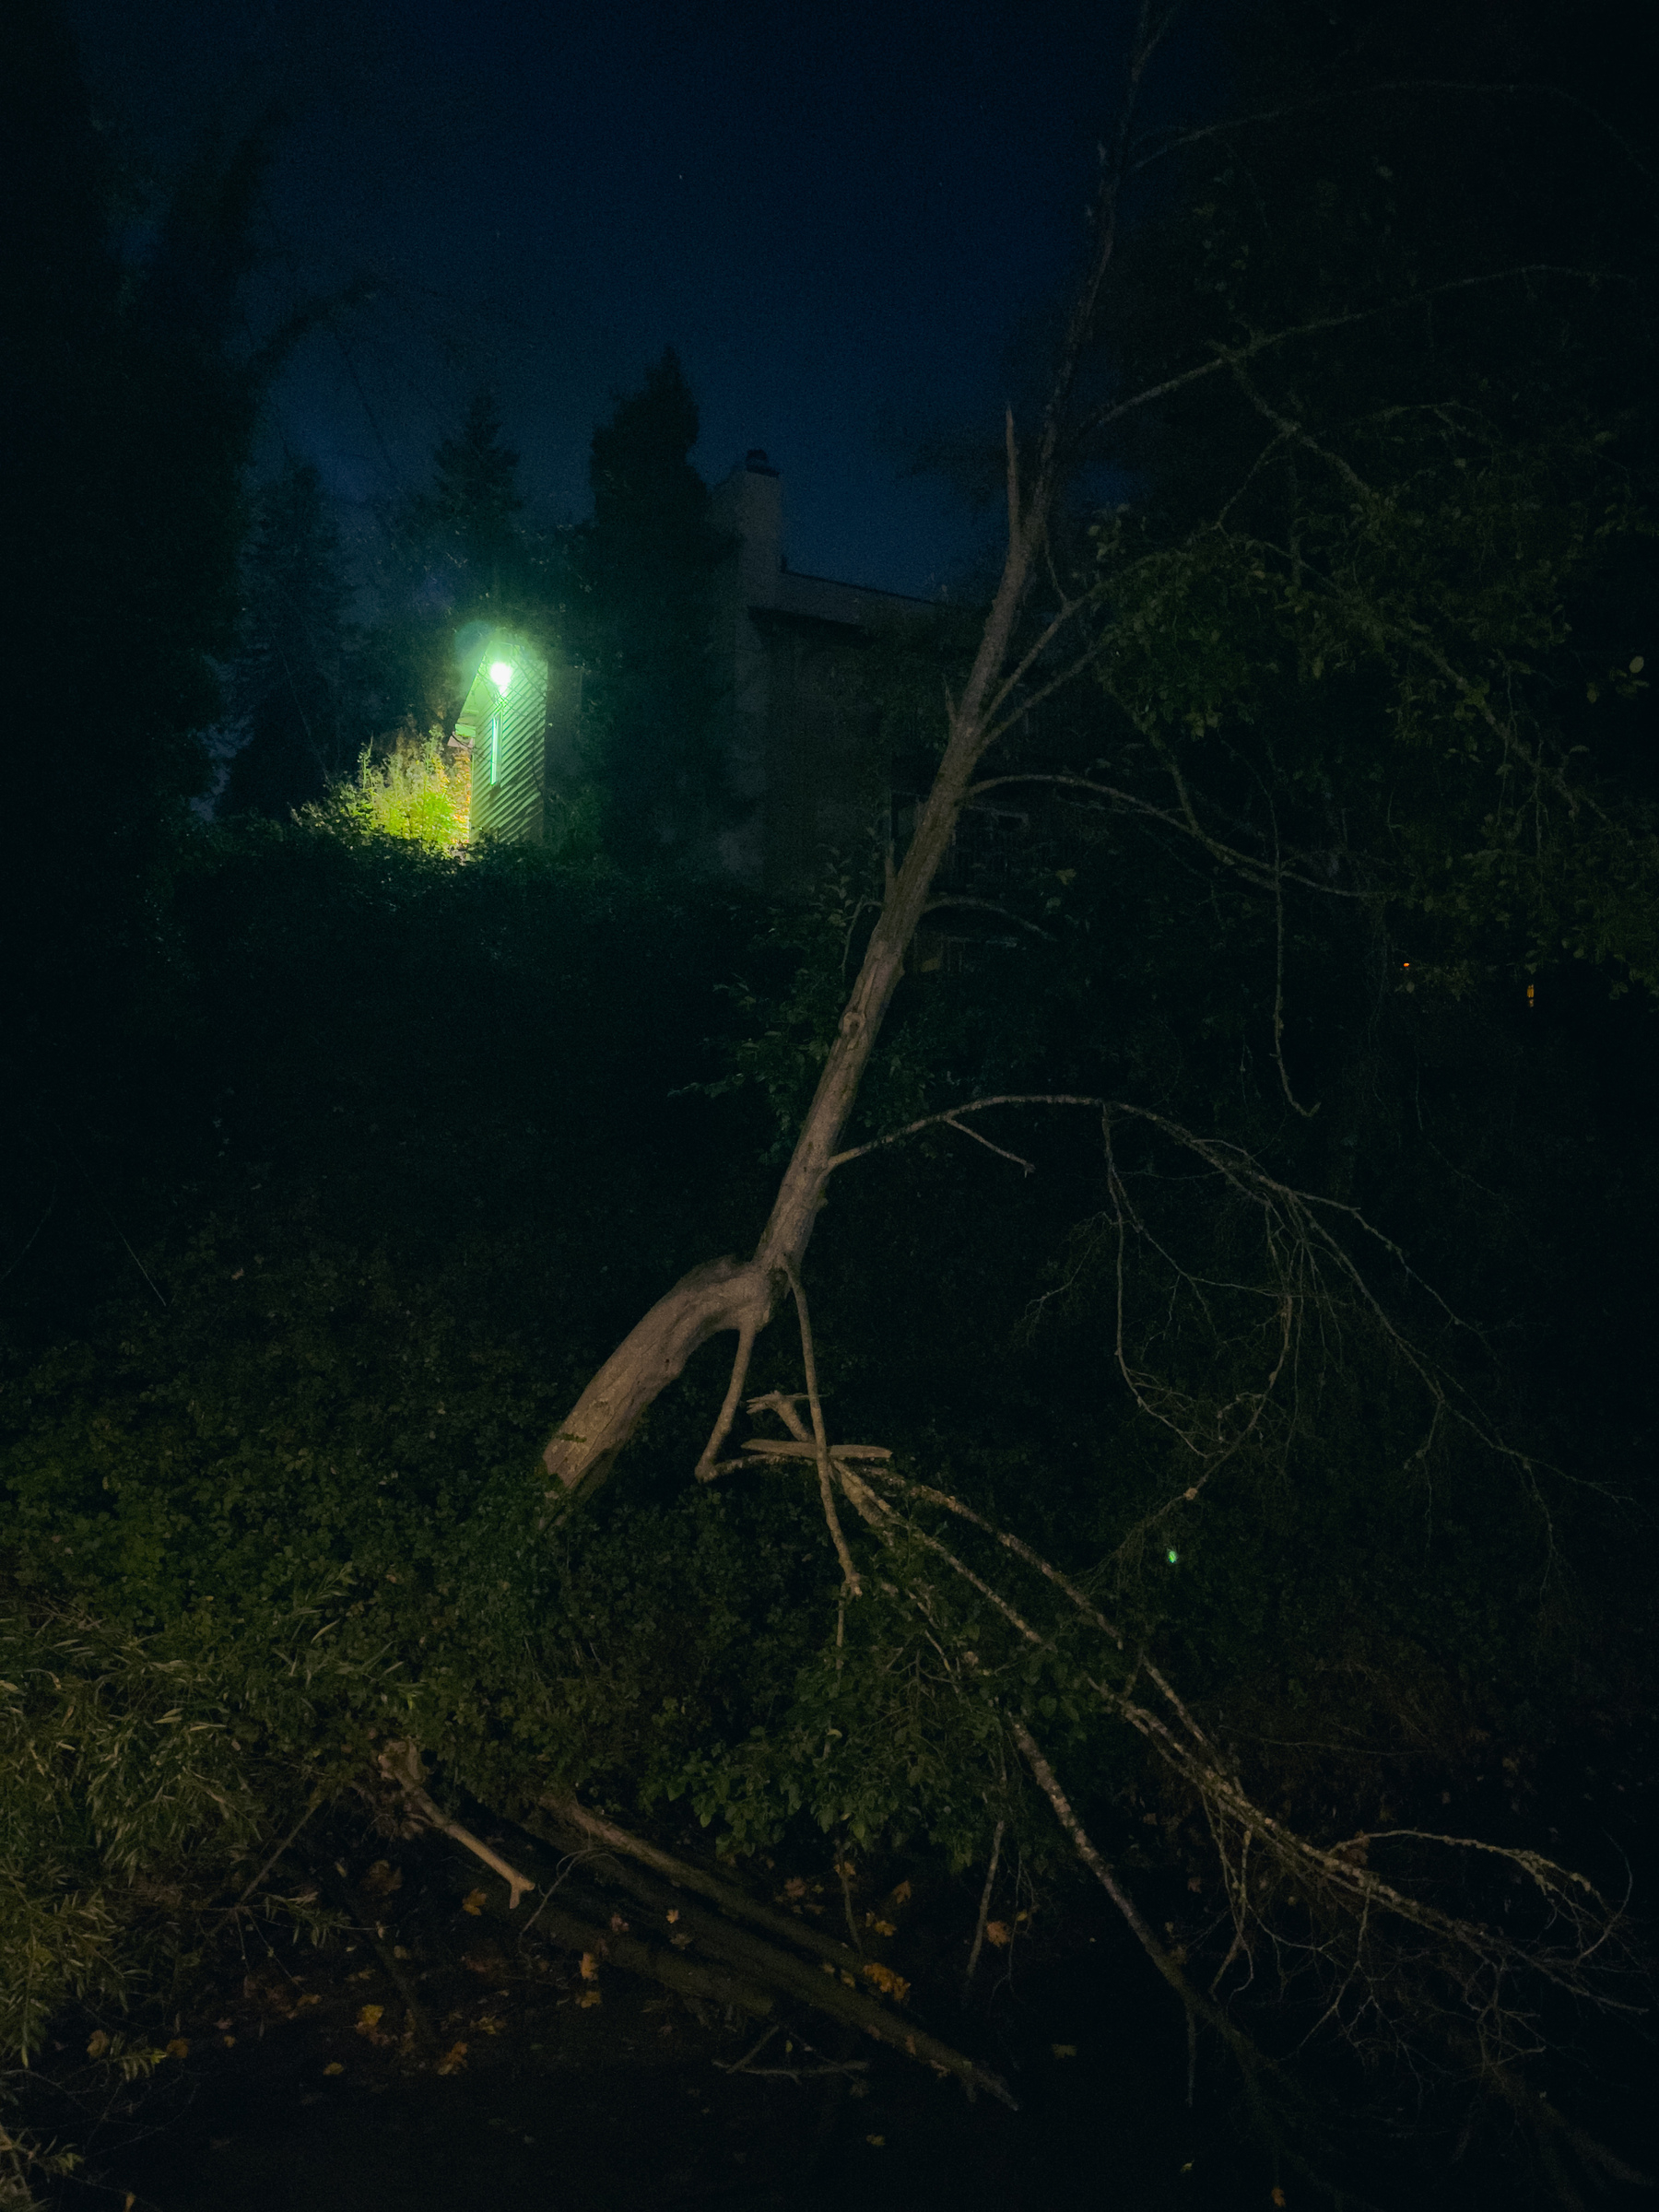 Tree trunk and roots in foreground, small building with security light lighting the scene on a rise above.